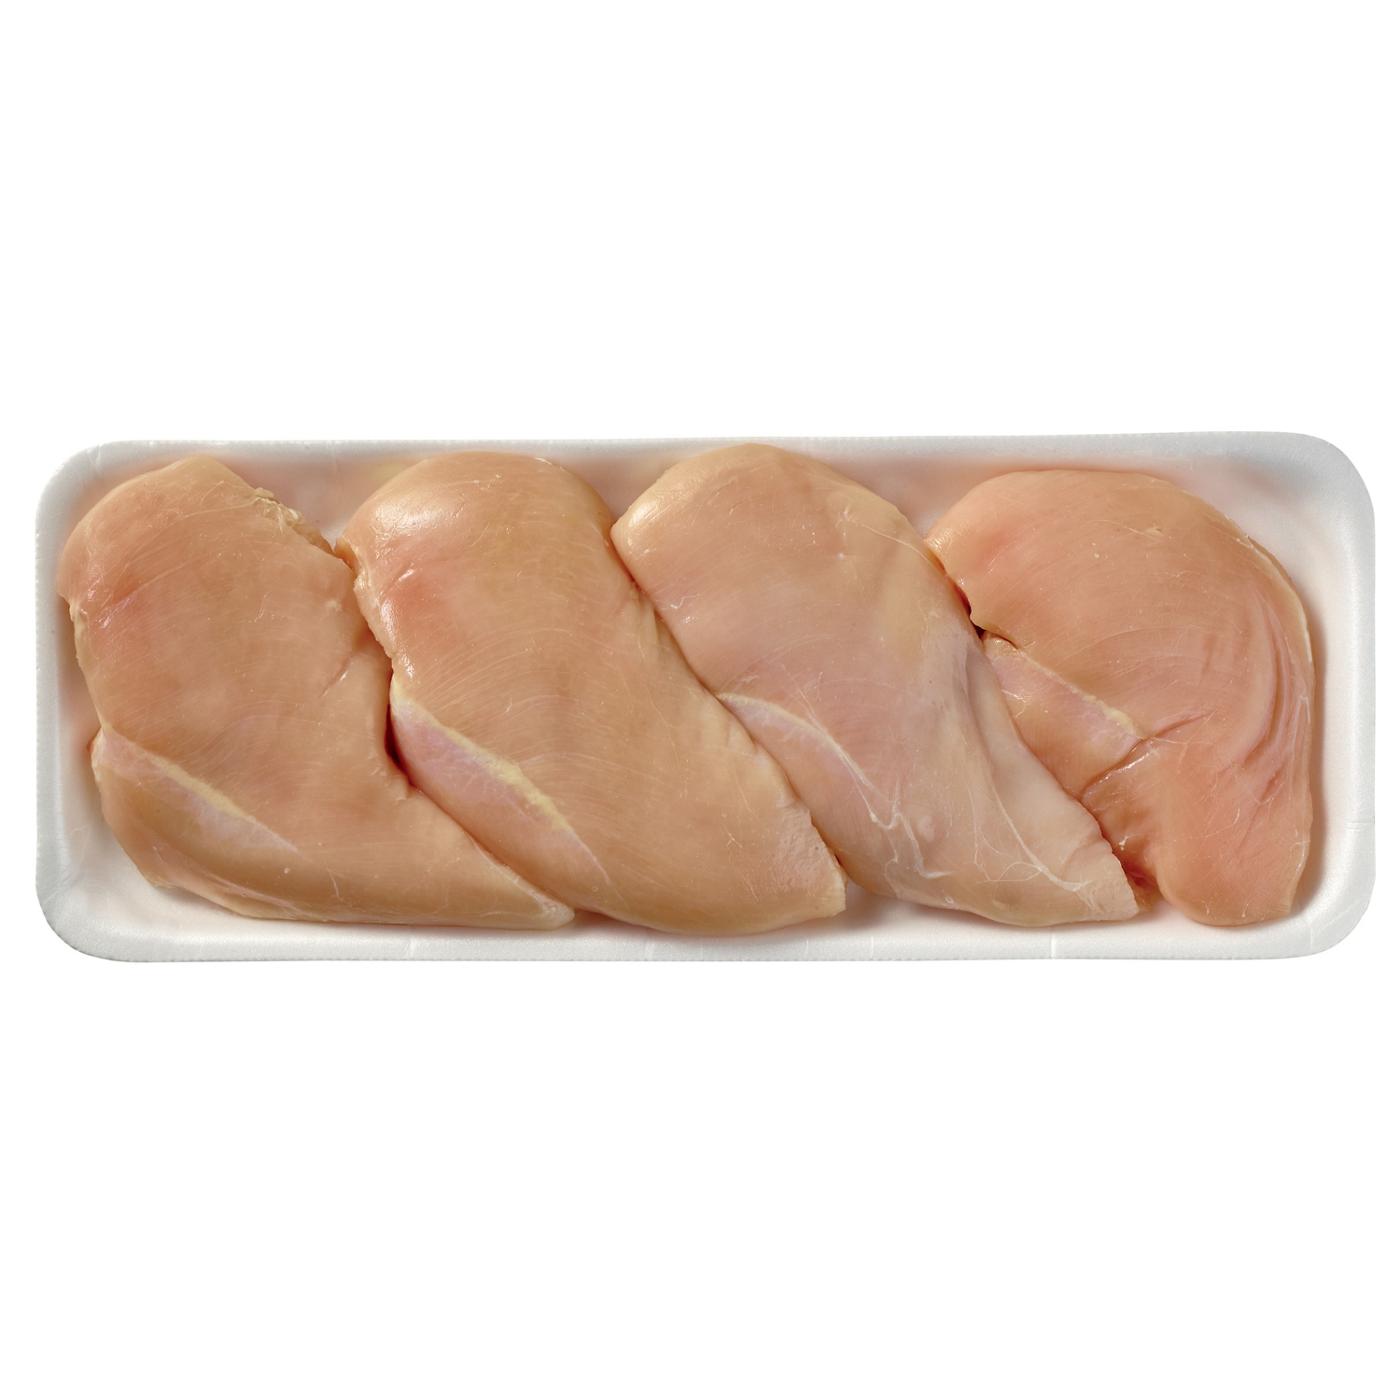 H-E-B Natural Boneless Chicken Breasts; image 3 of 4